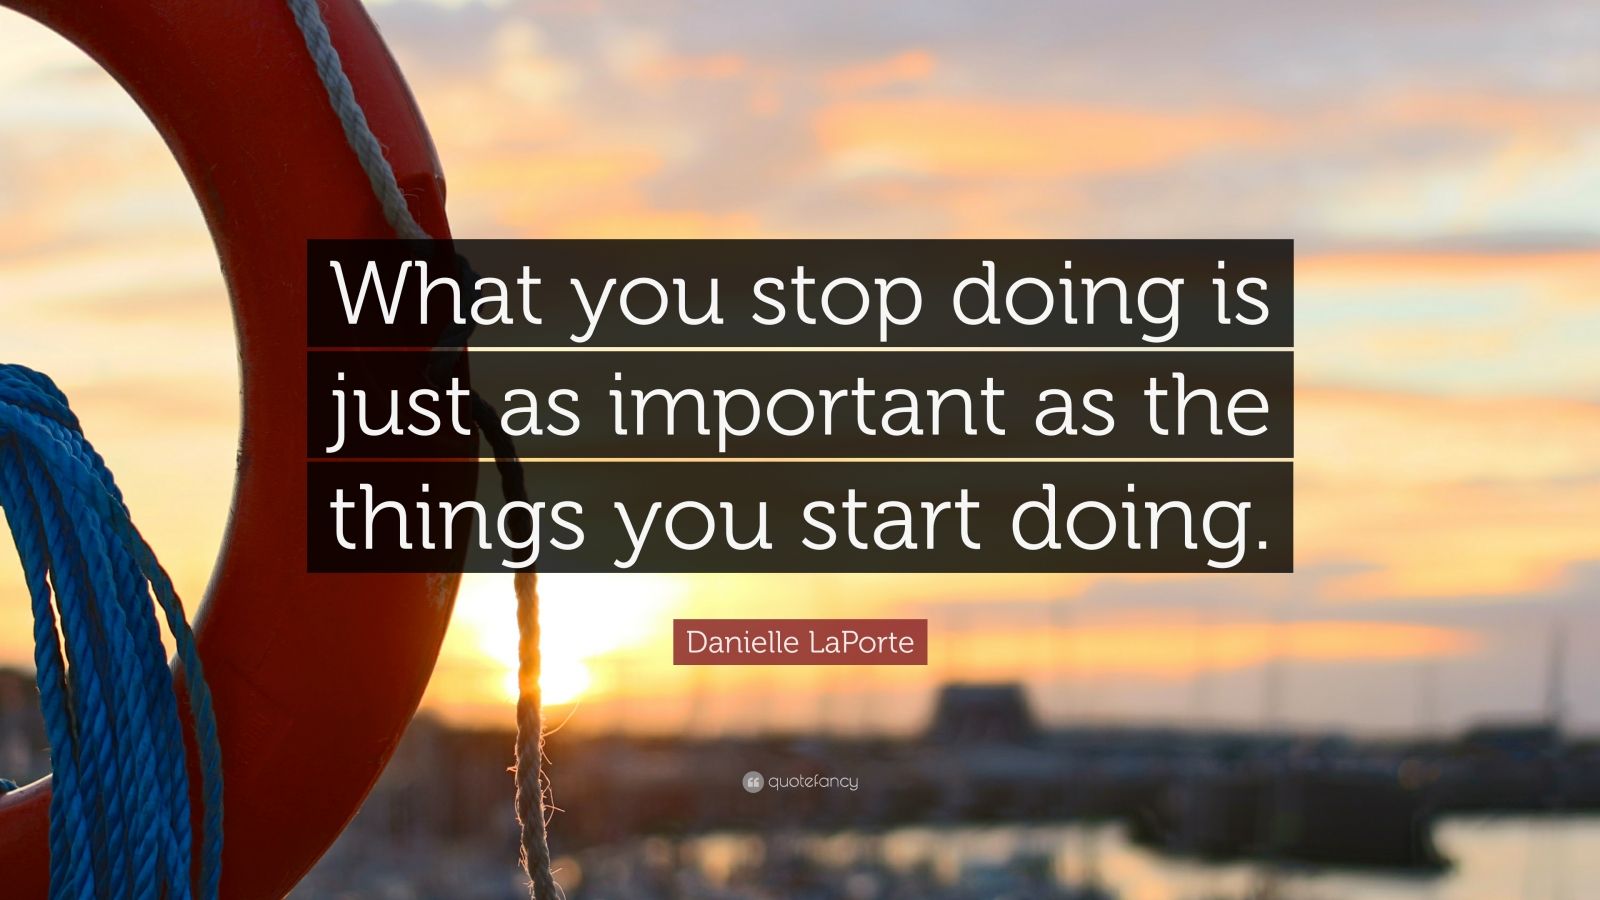 Danielle LaPorte Quote: "What you stop doing is just as important as the things you start doing ...